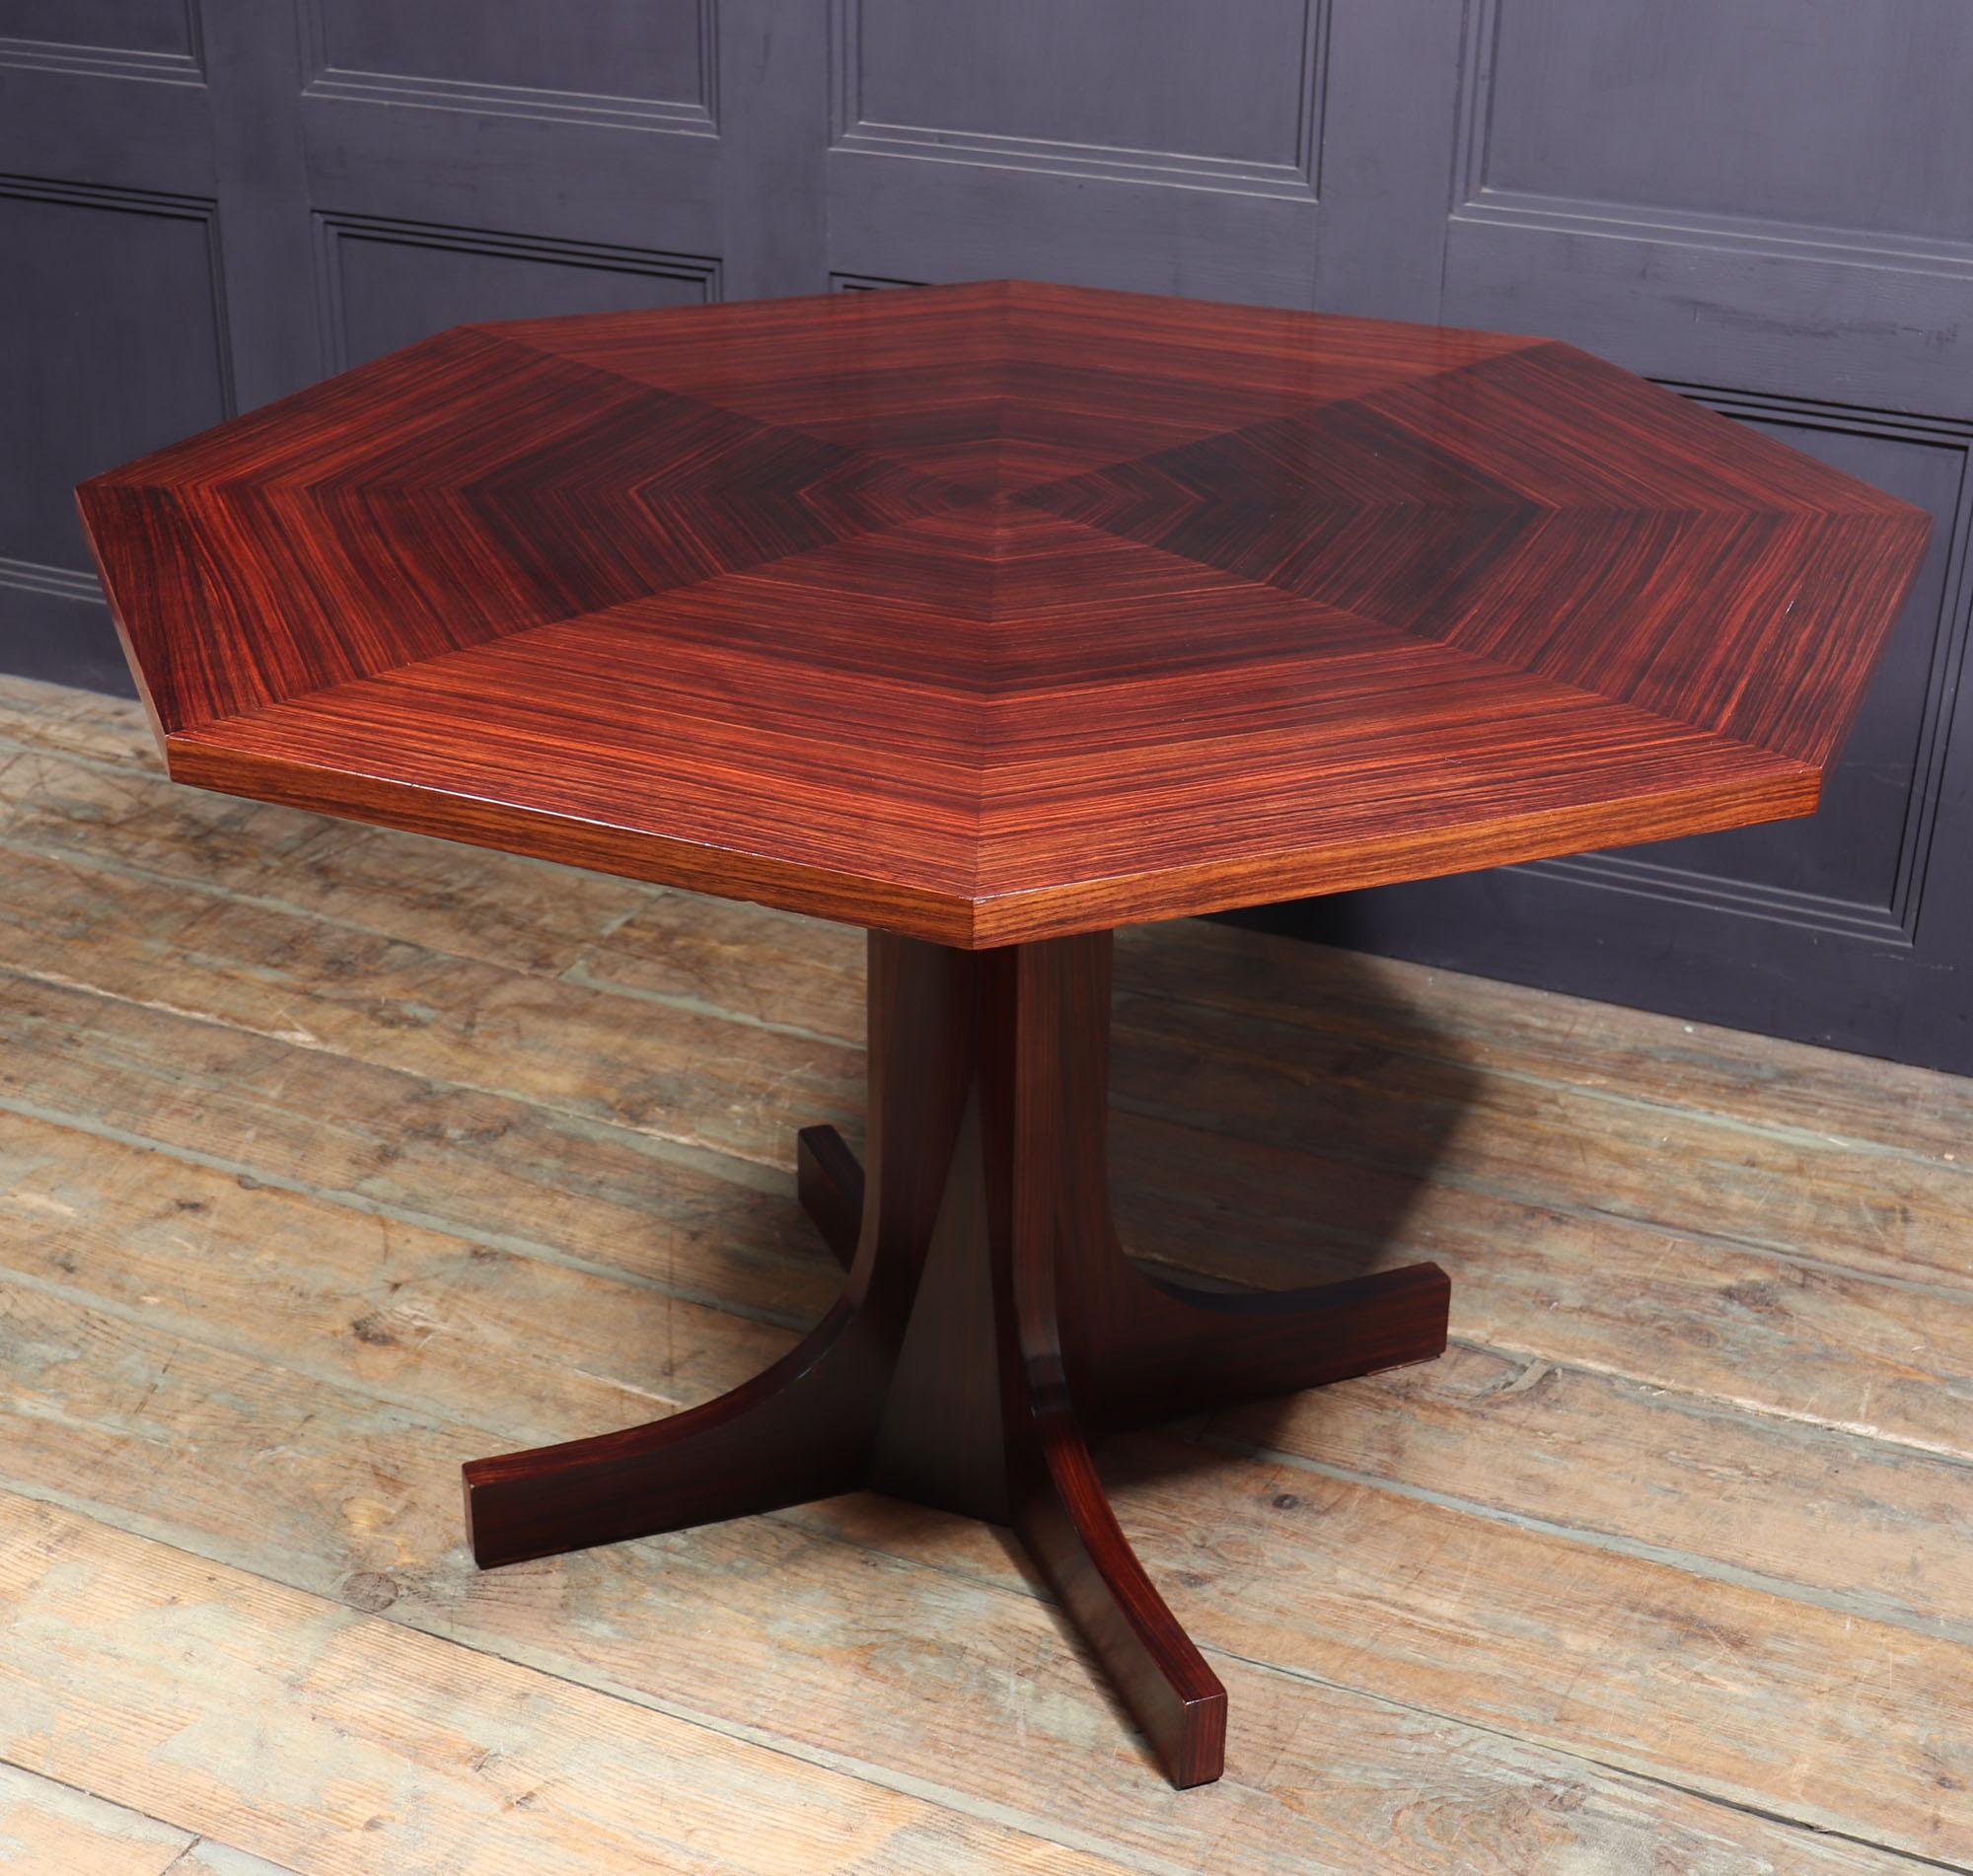 Italian midcentury dining table.
A midcentury dining table of octagonal form, having a stunning segmented top and standing on a central column with four feet
Age: circa 1960

Style: Italian midcentury

Origin : Italy

Material: